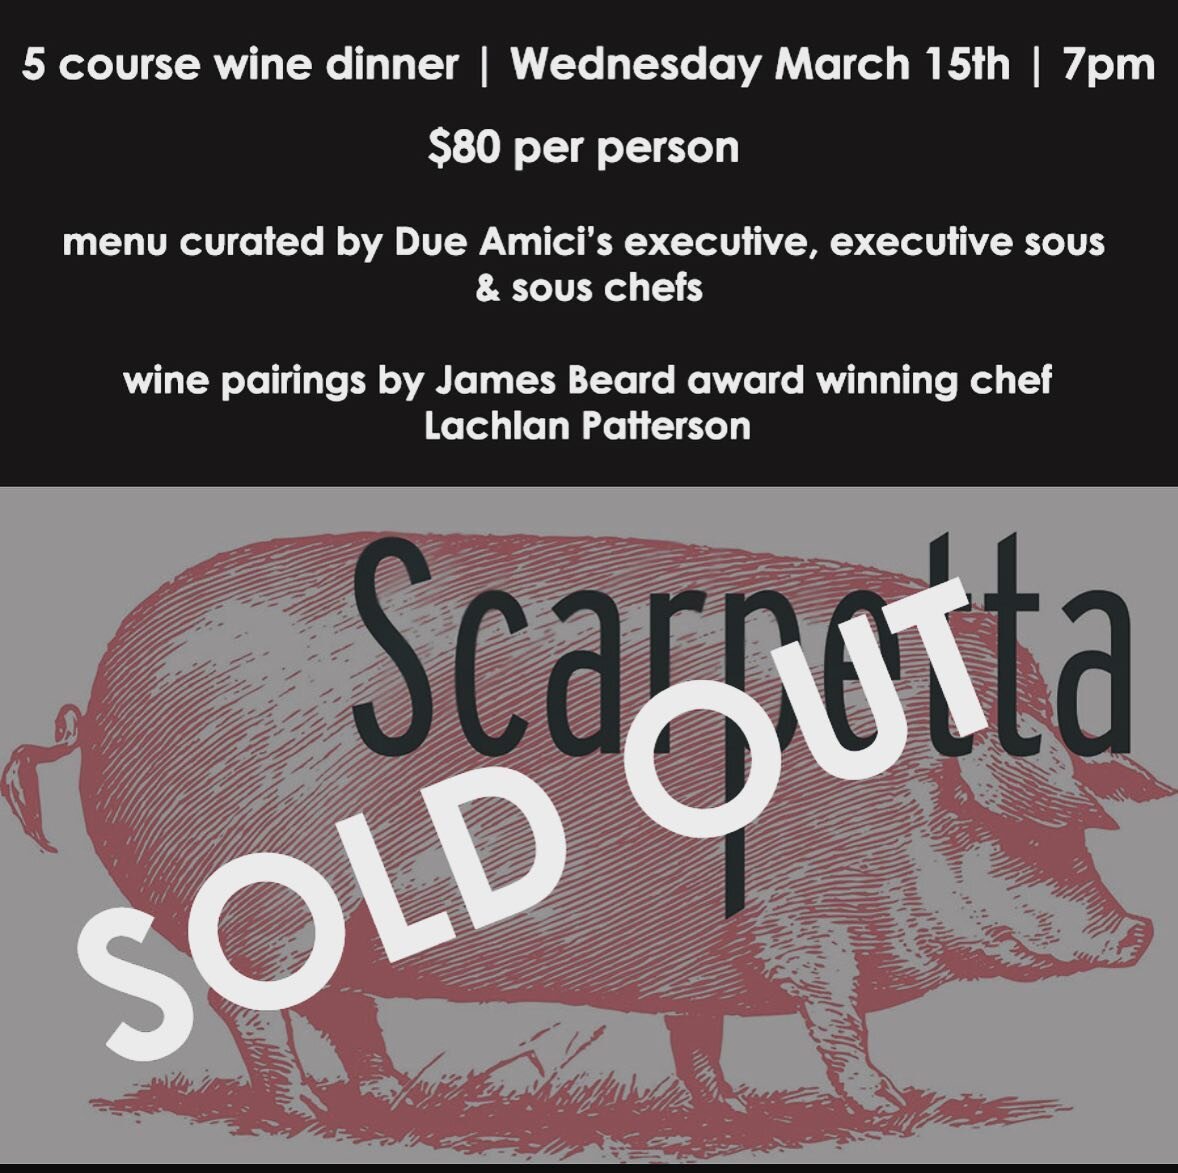 Thank you to everyone who purchased tickets to join us tomorrow night! We are beyond excited for this wine dinner! 

See you at 7pm! 

&bull;
&bull;
&bull;
&bull;
&bull;
&bull;
#dueamici #downtowncolumbus #scarpettawinedinner #asseenincolumbus #wine 